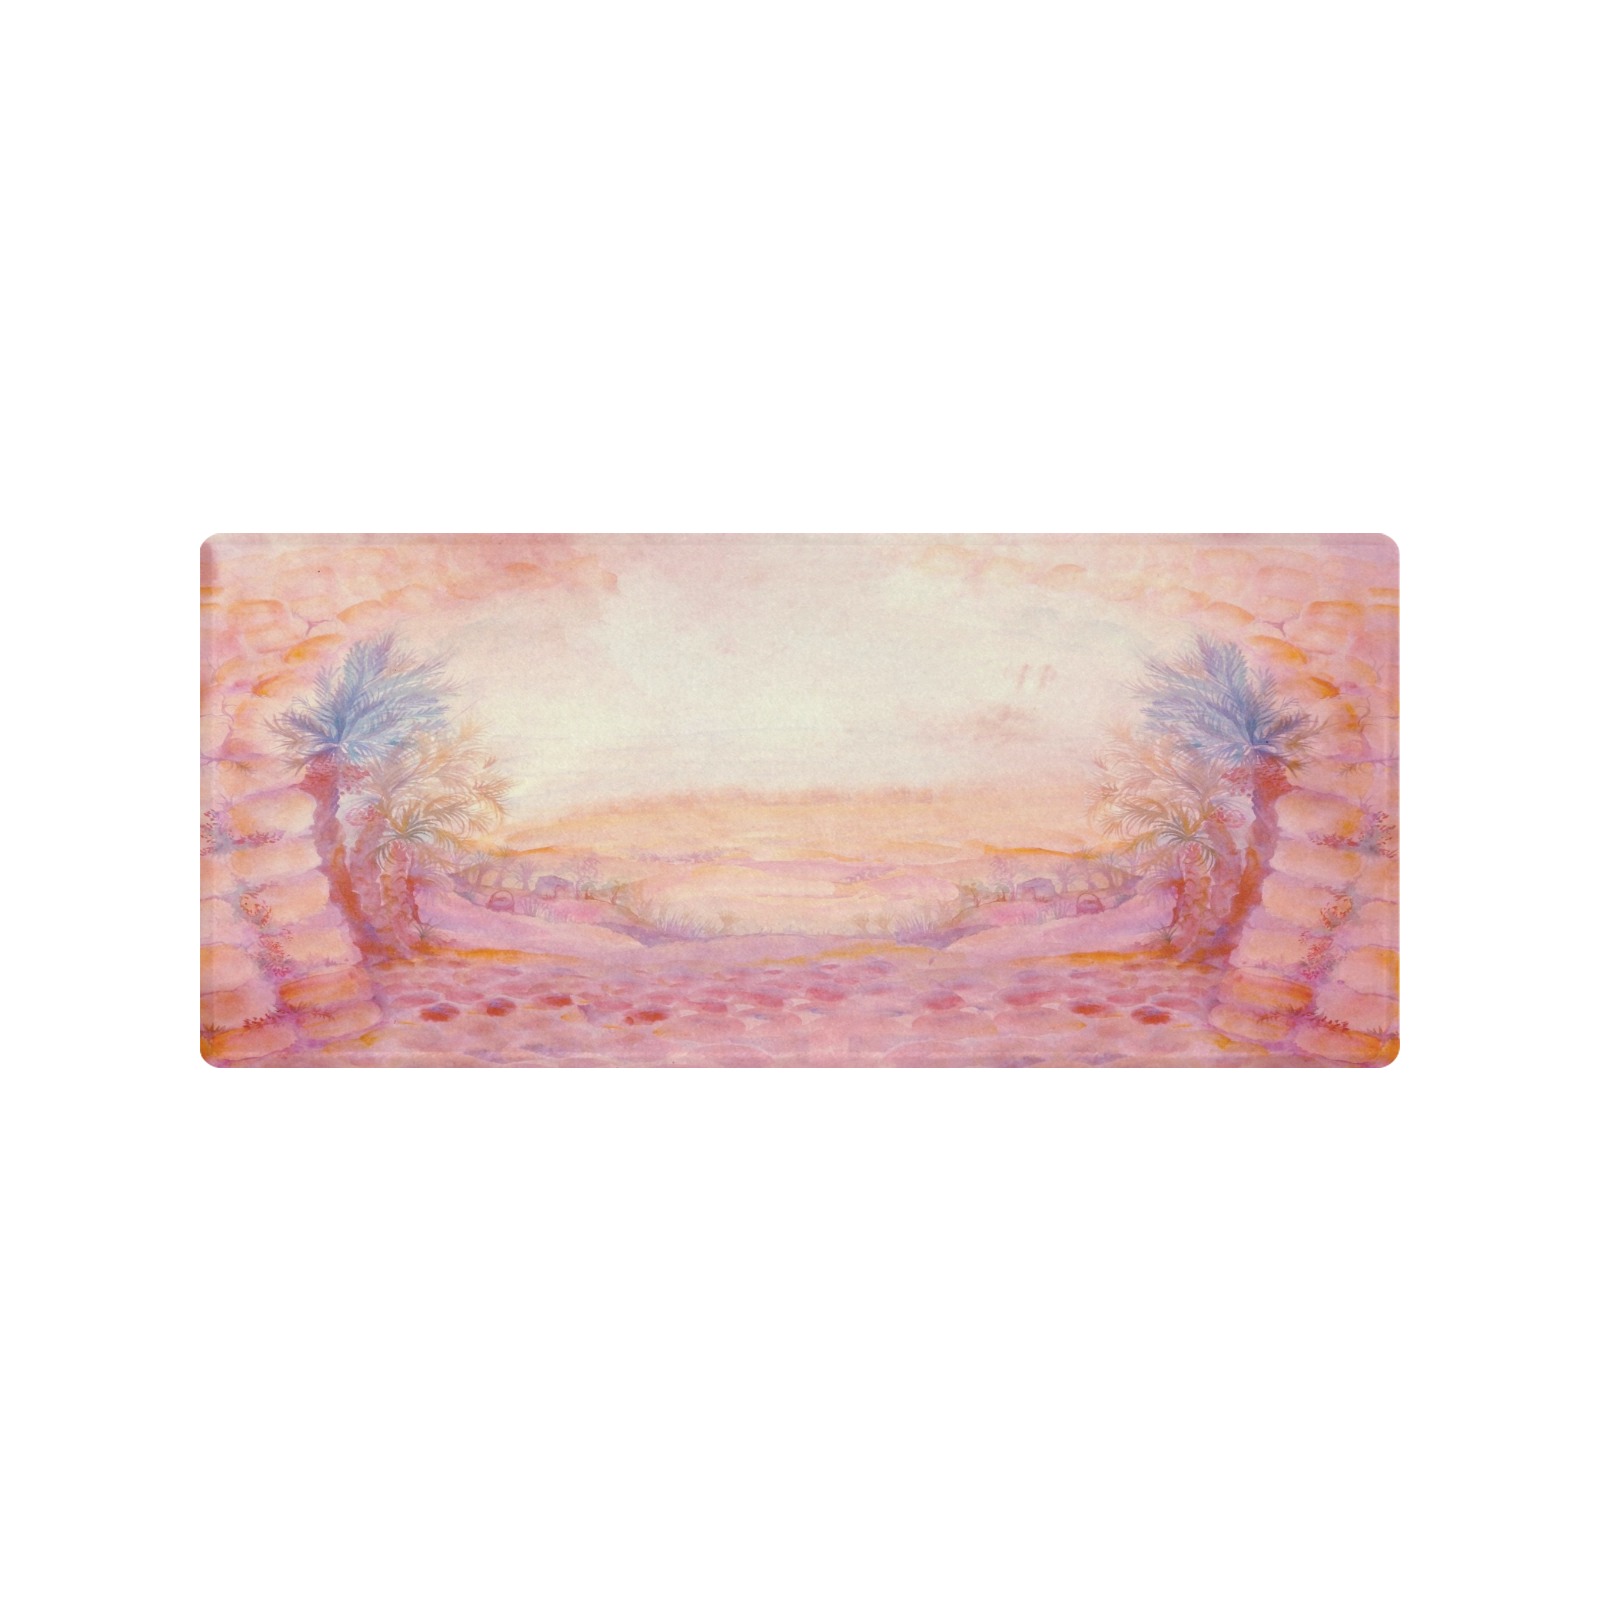 desert2-35x16 inches Gaming Mousepad (35"x16")